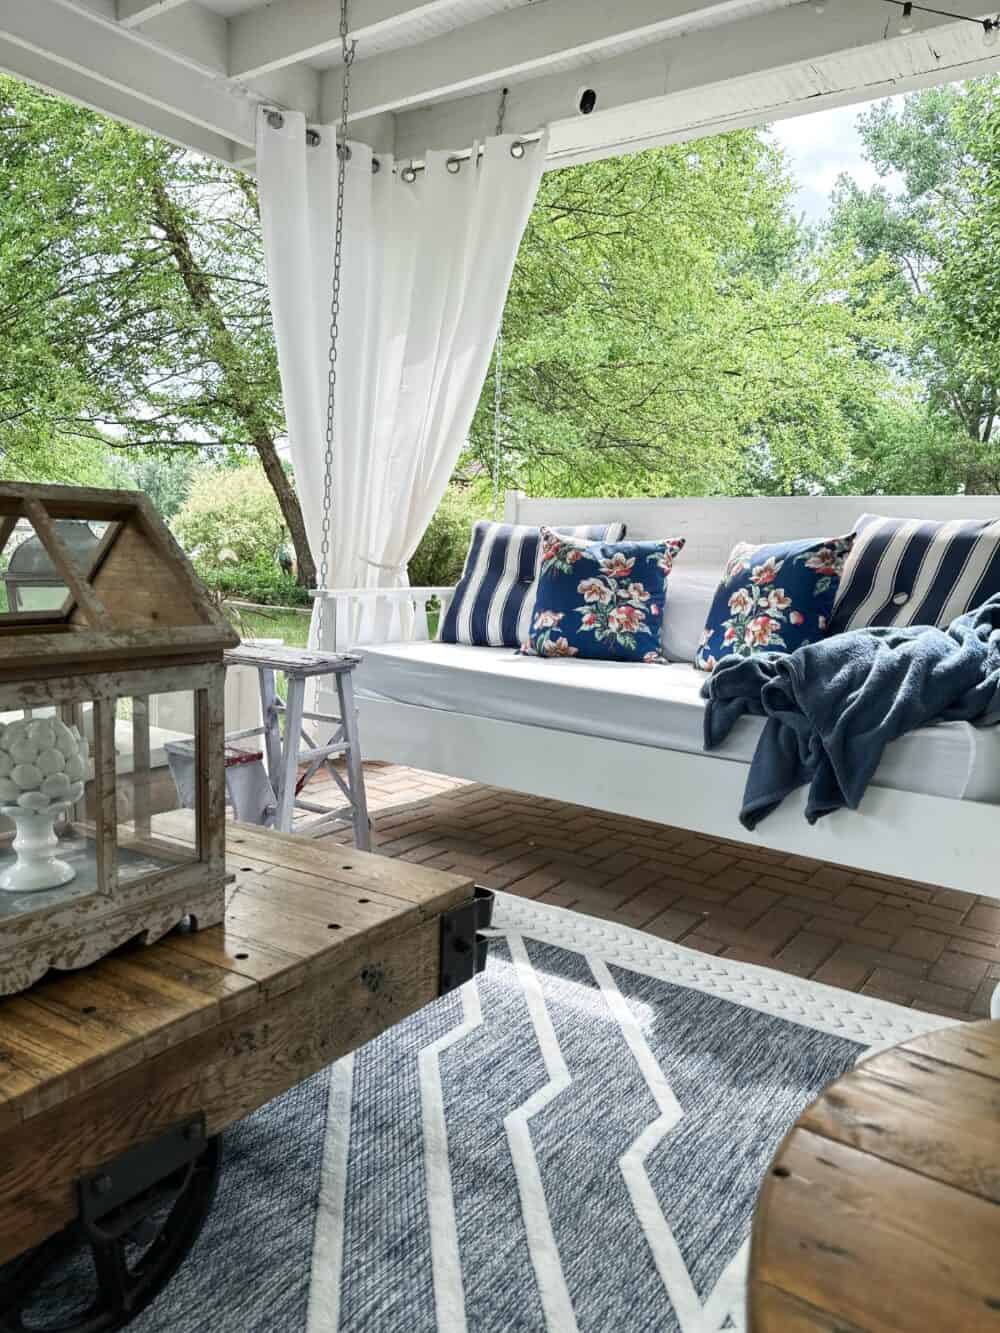 Photo of the swing bed in our outdoor living room with blue and white pillows and rug